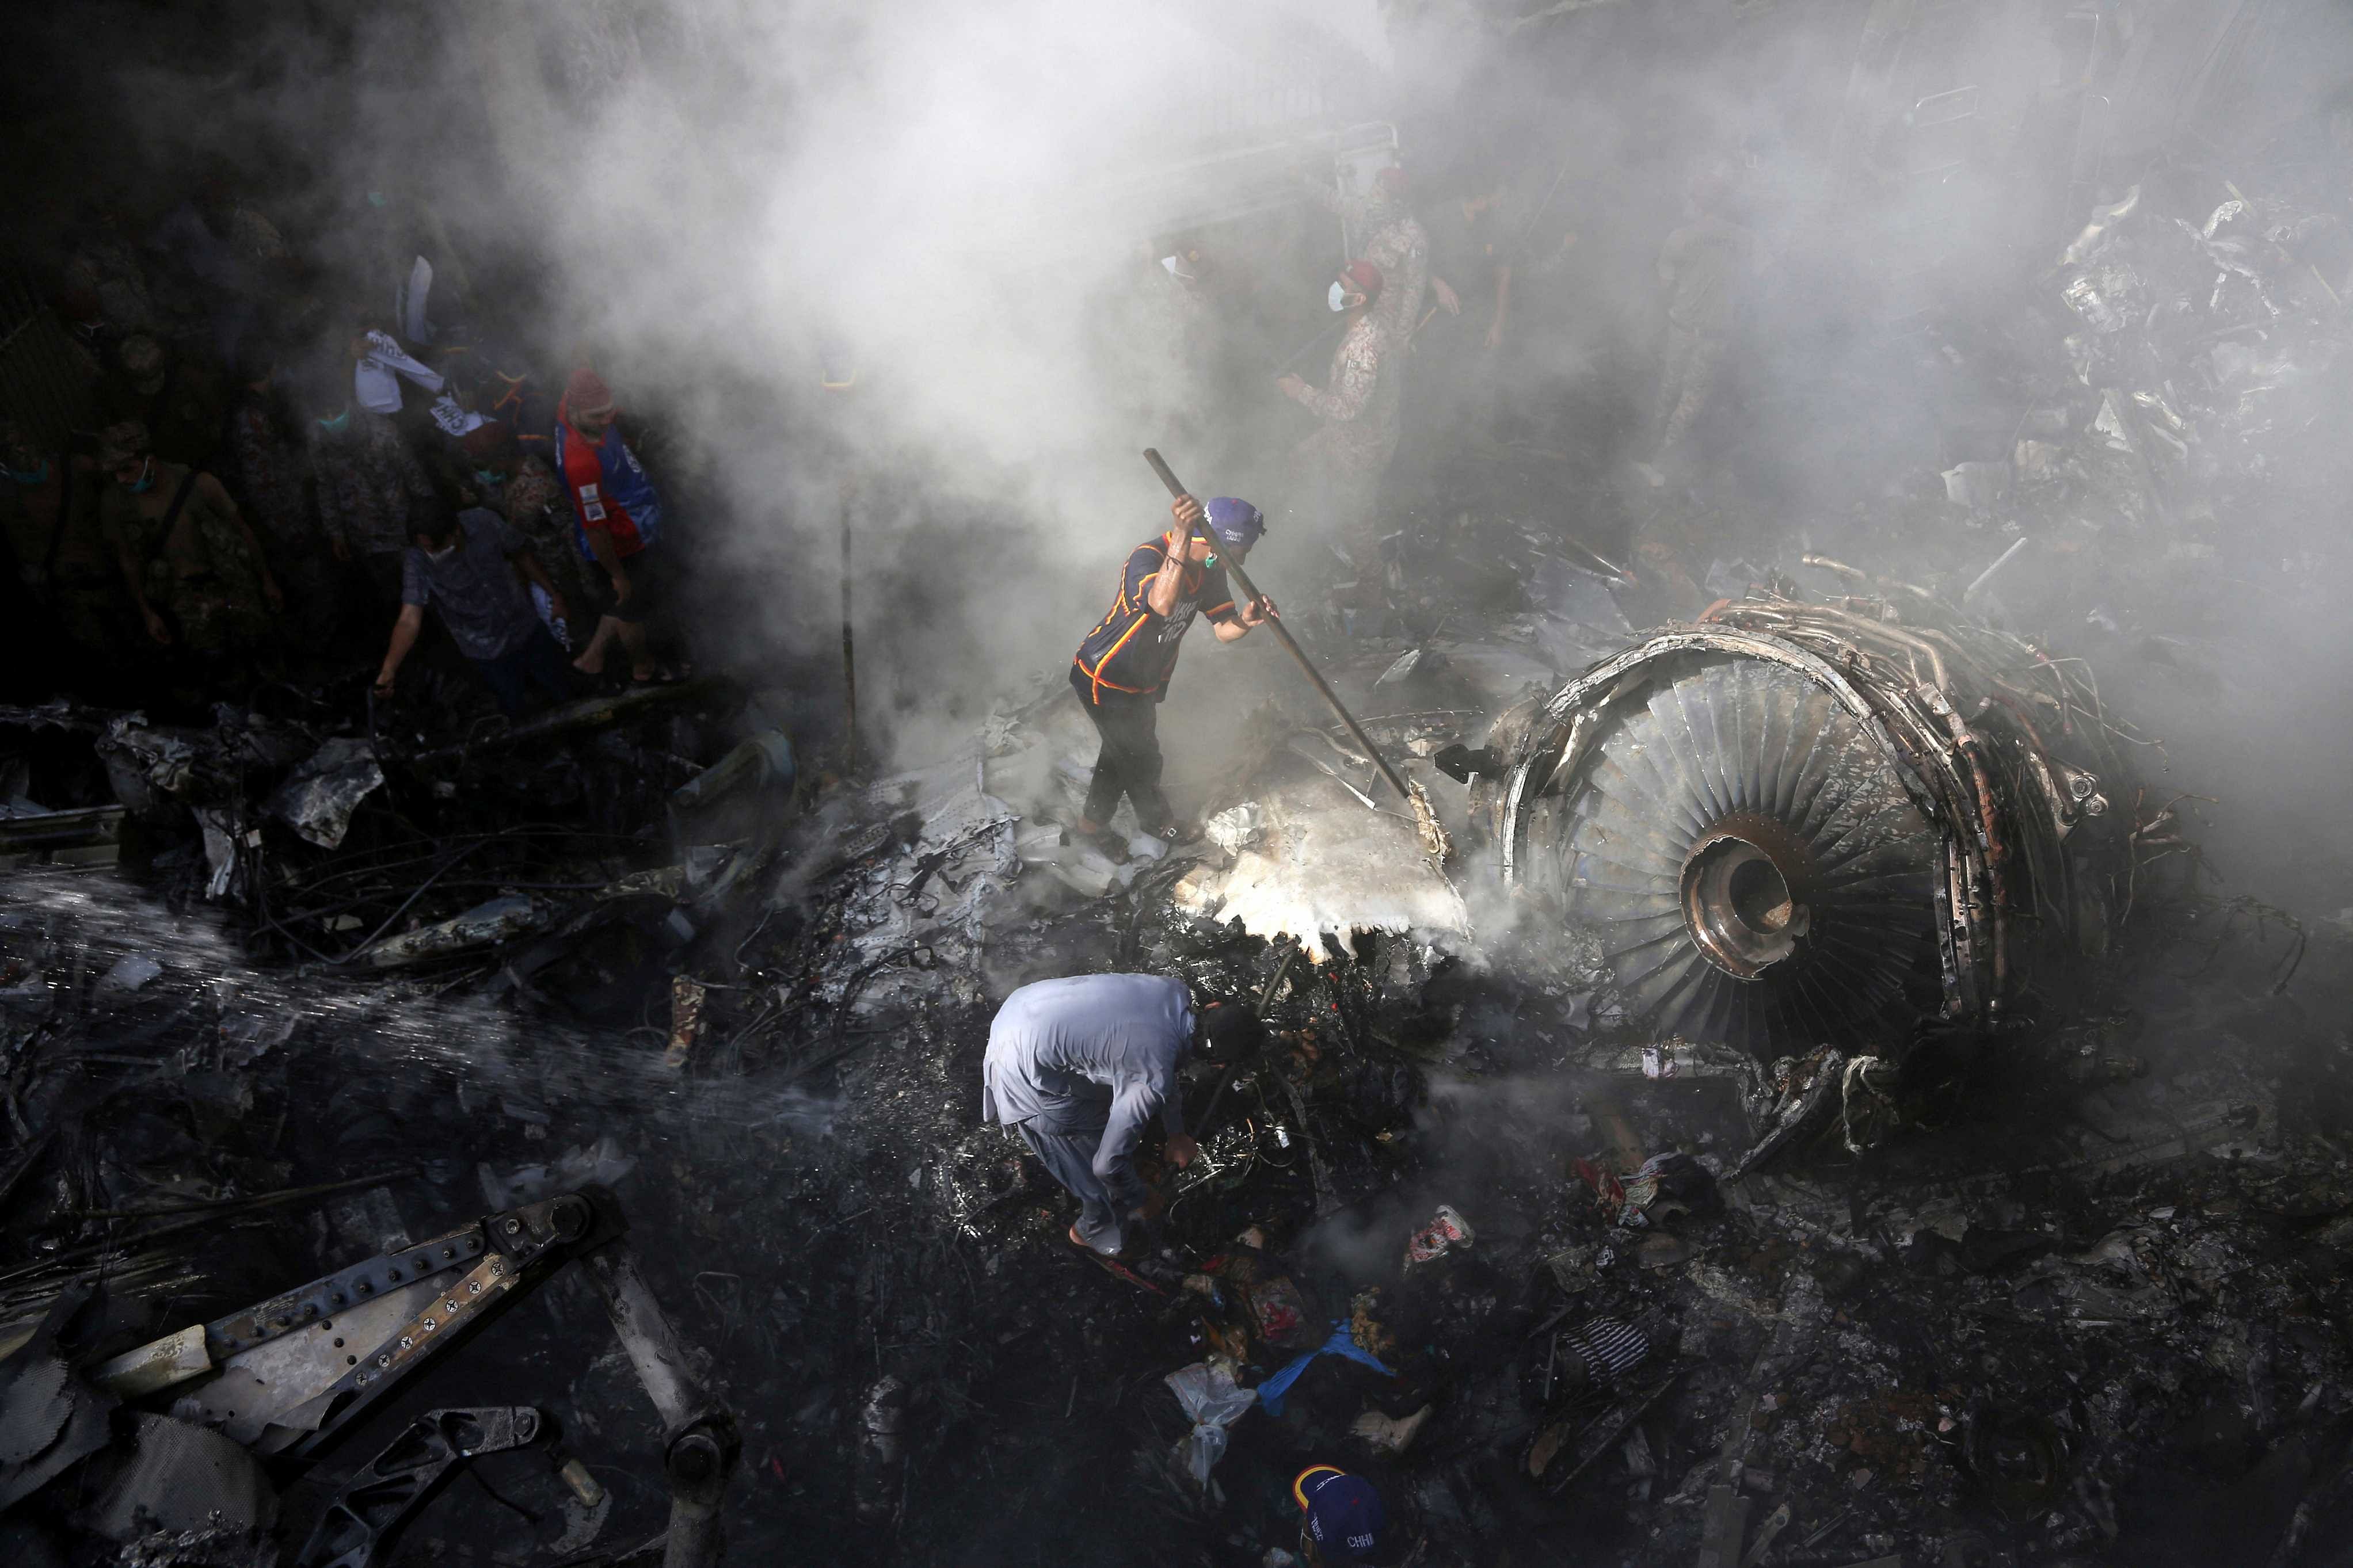 Volunteers look for survivors of a plane that crashed in a residential area of Karachi, Pakistan. (AP photo)